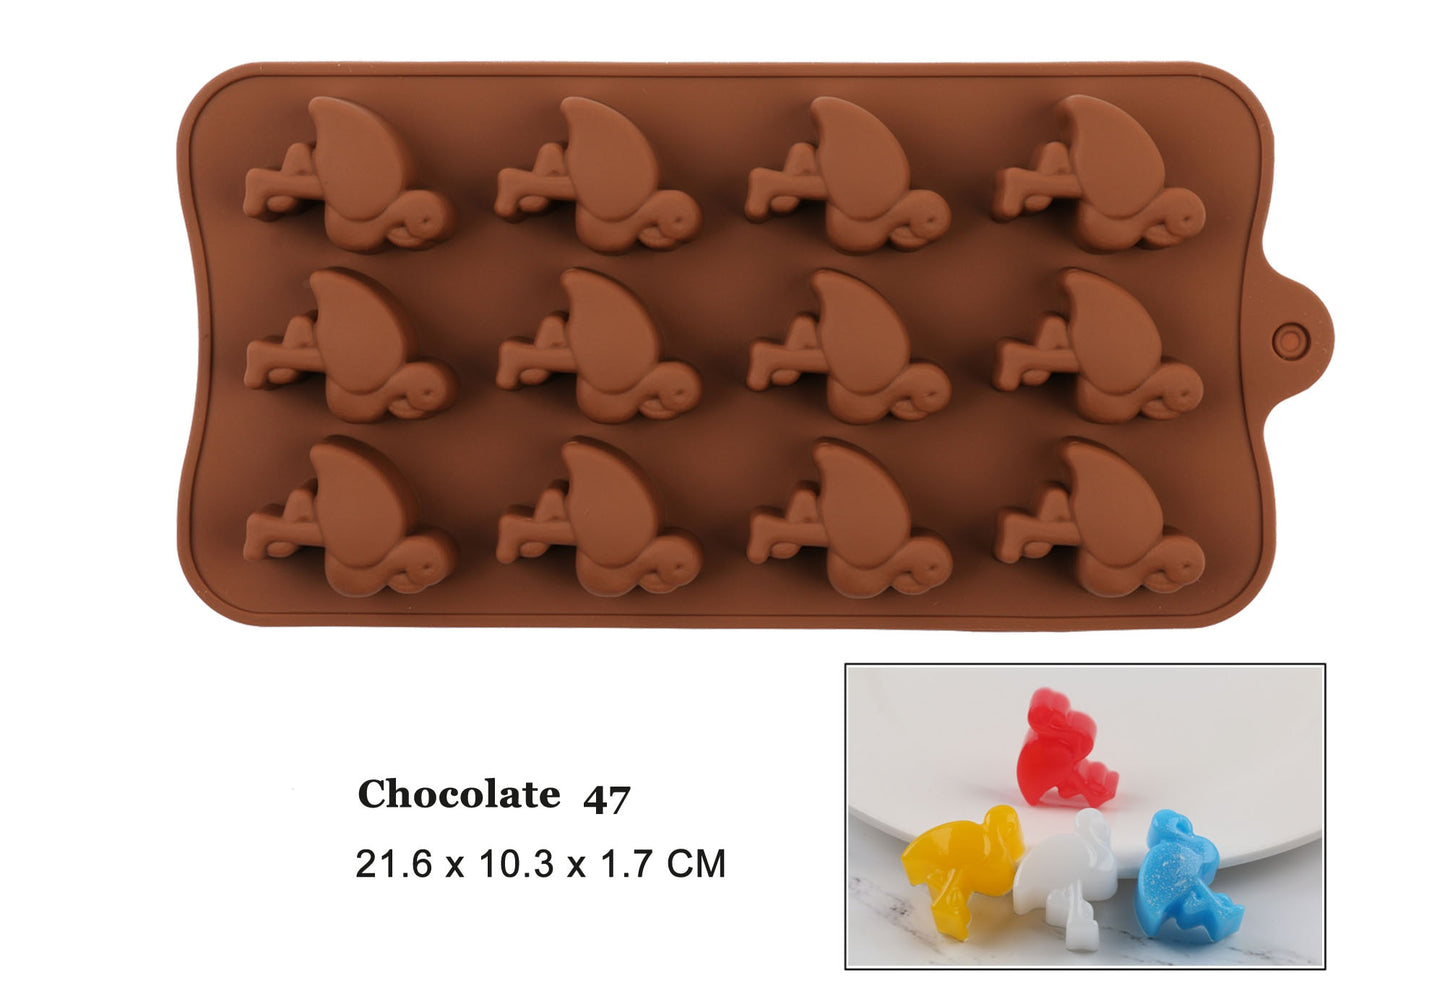 New Silicone Chocolate Mold 3D Shapes Mold Fun Baking Tools